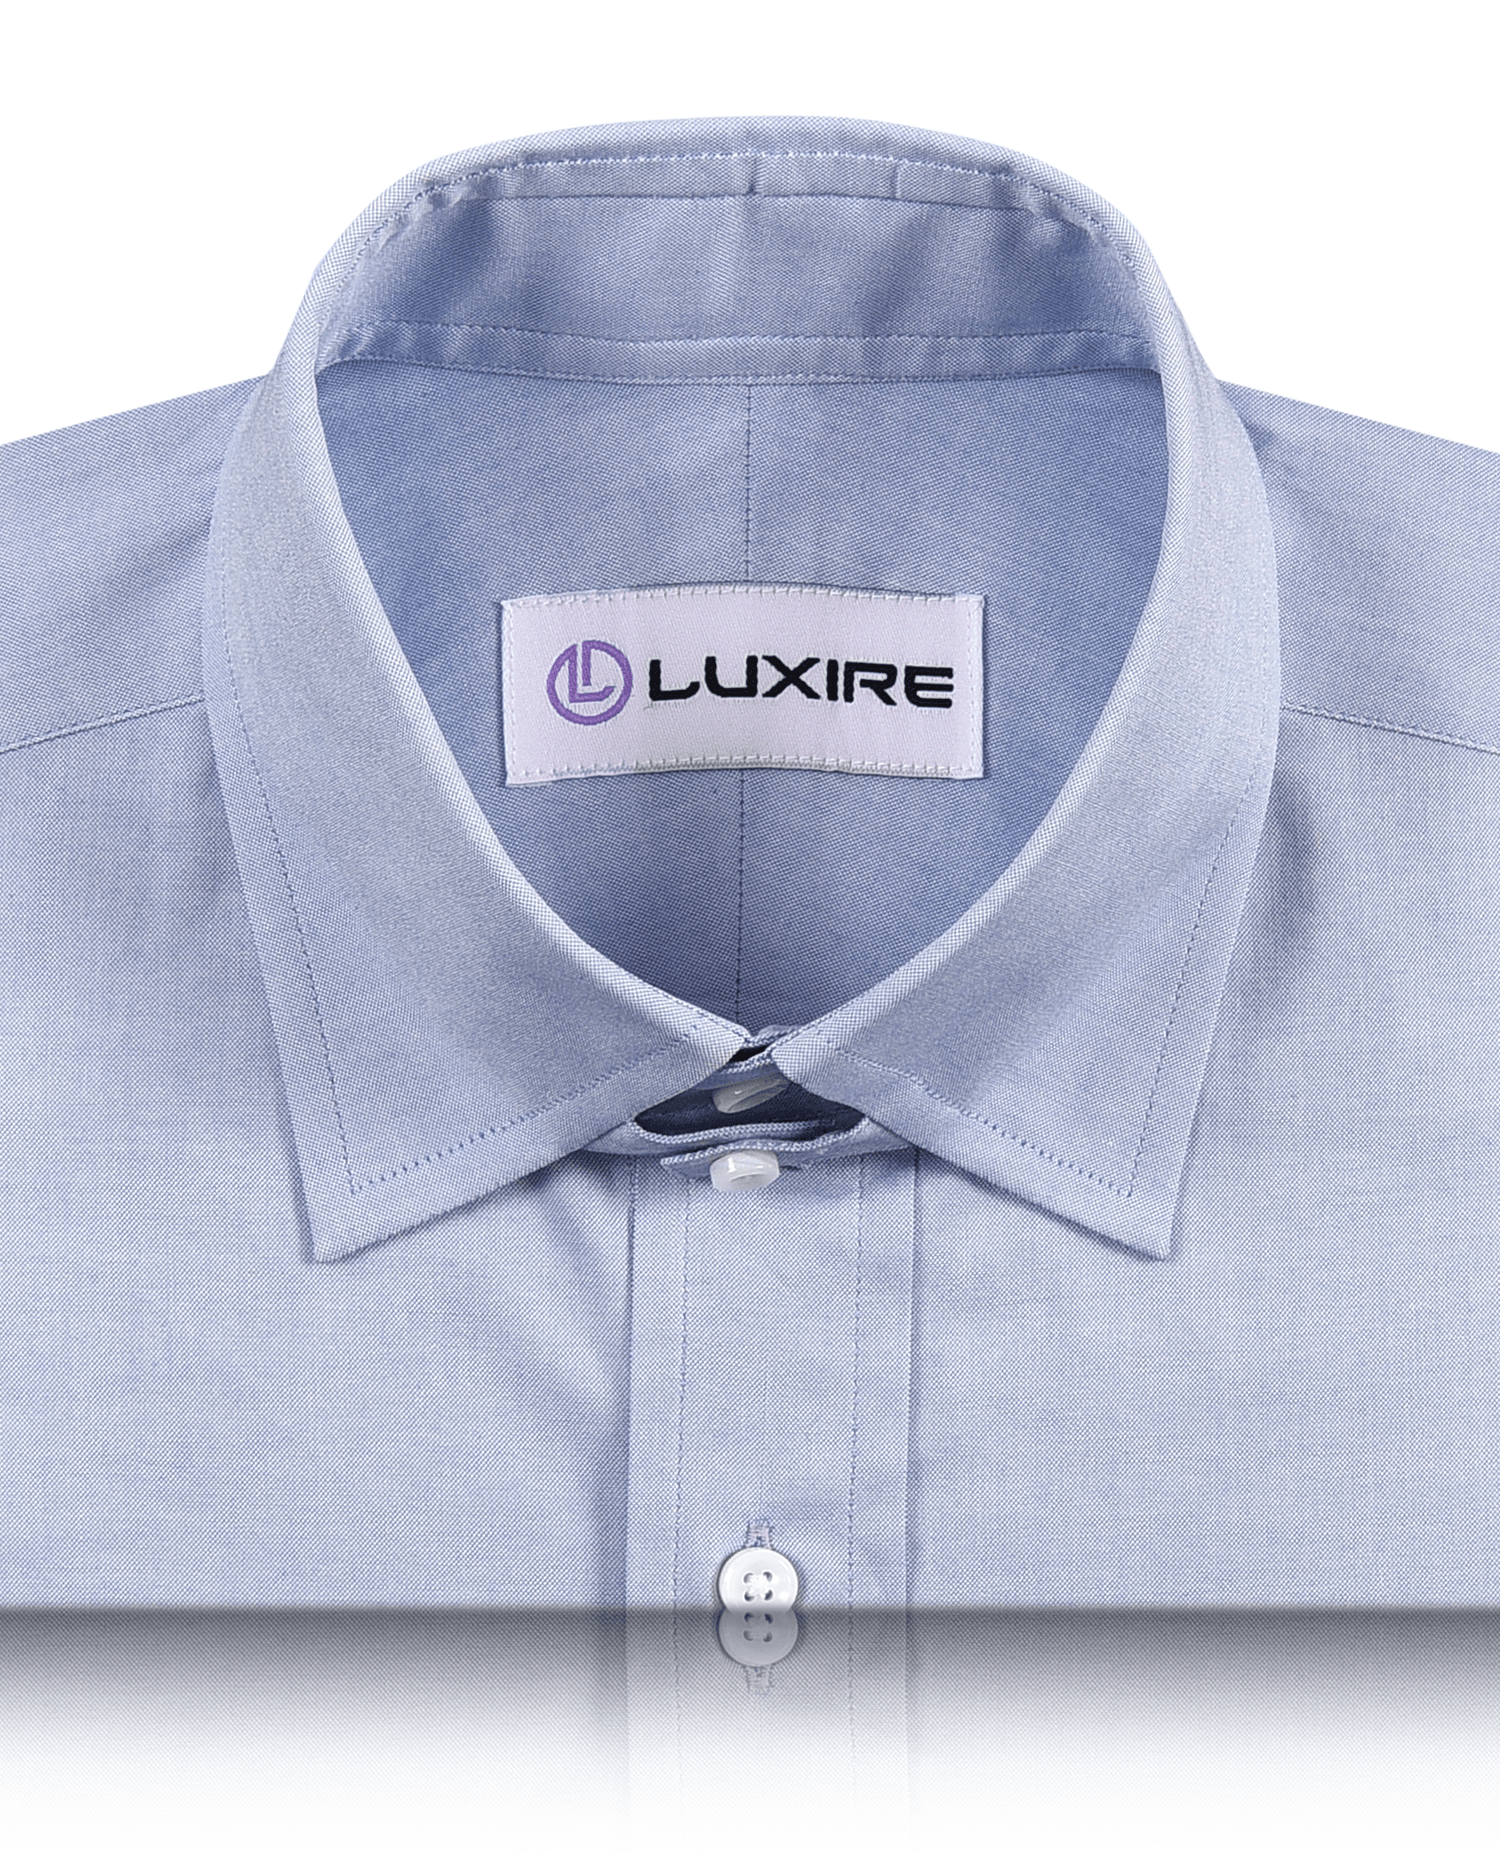 Collar of the custom oxford shirt for men by Luxire in blue pinpoint